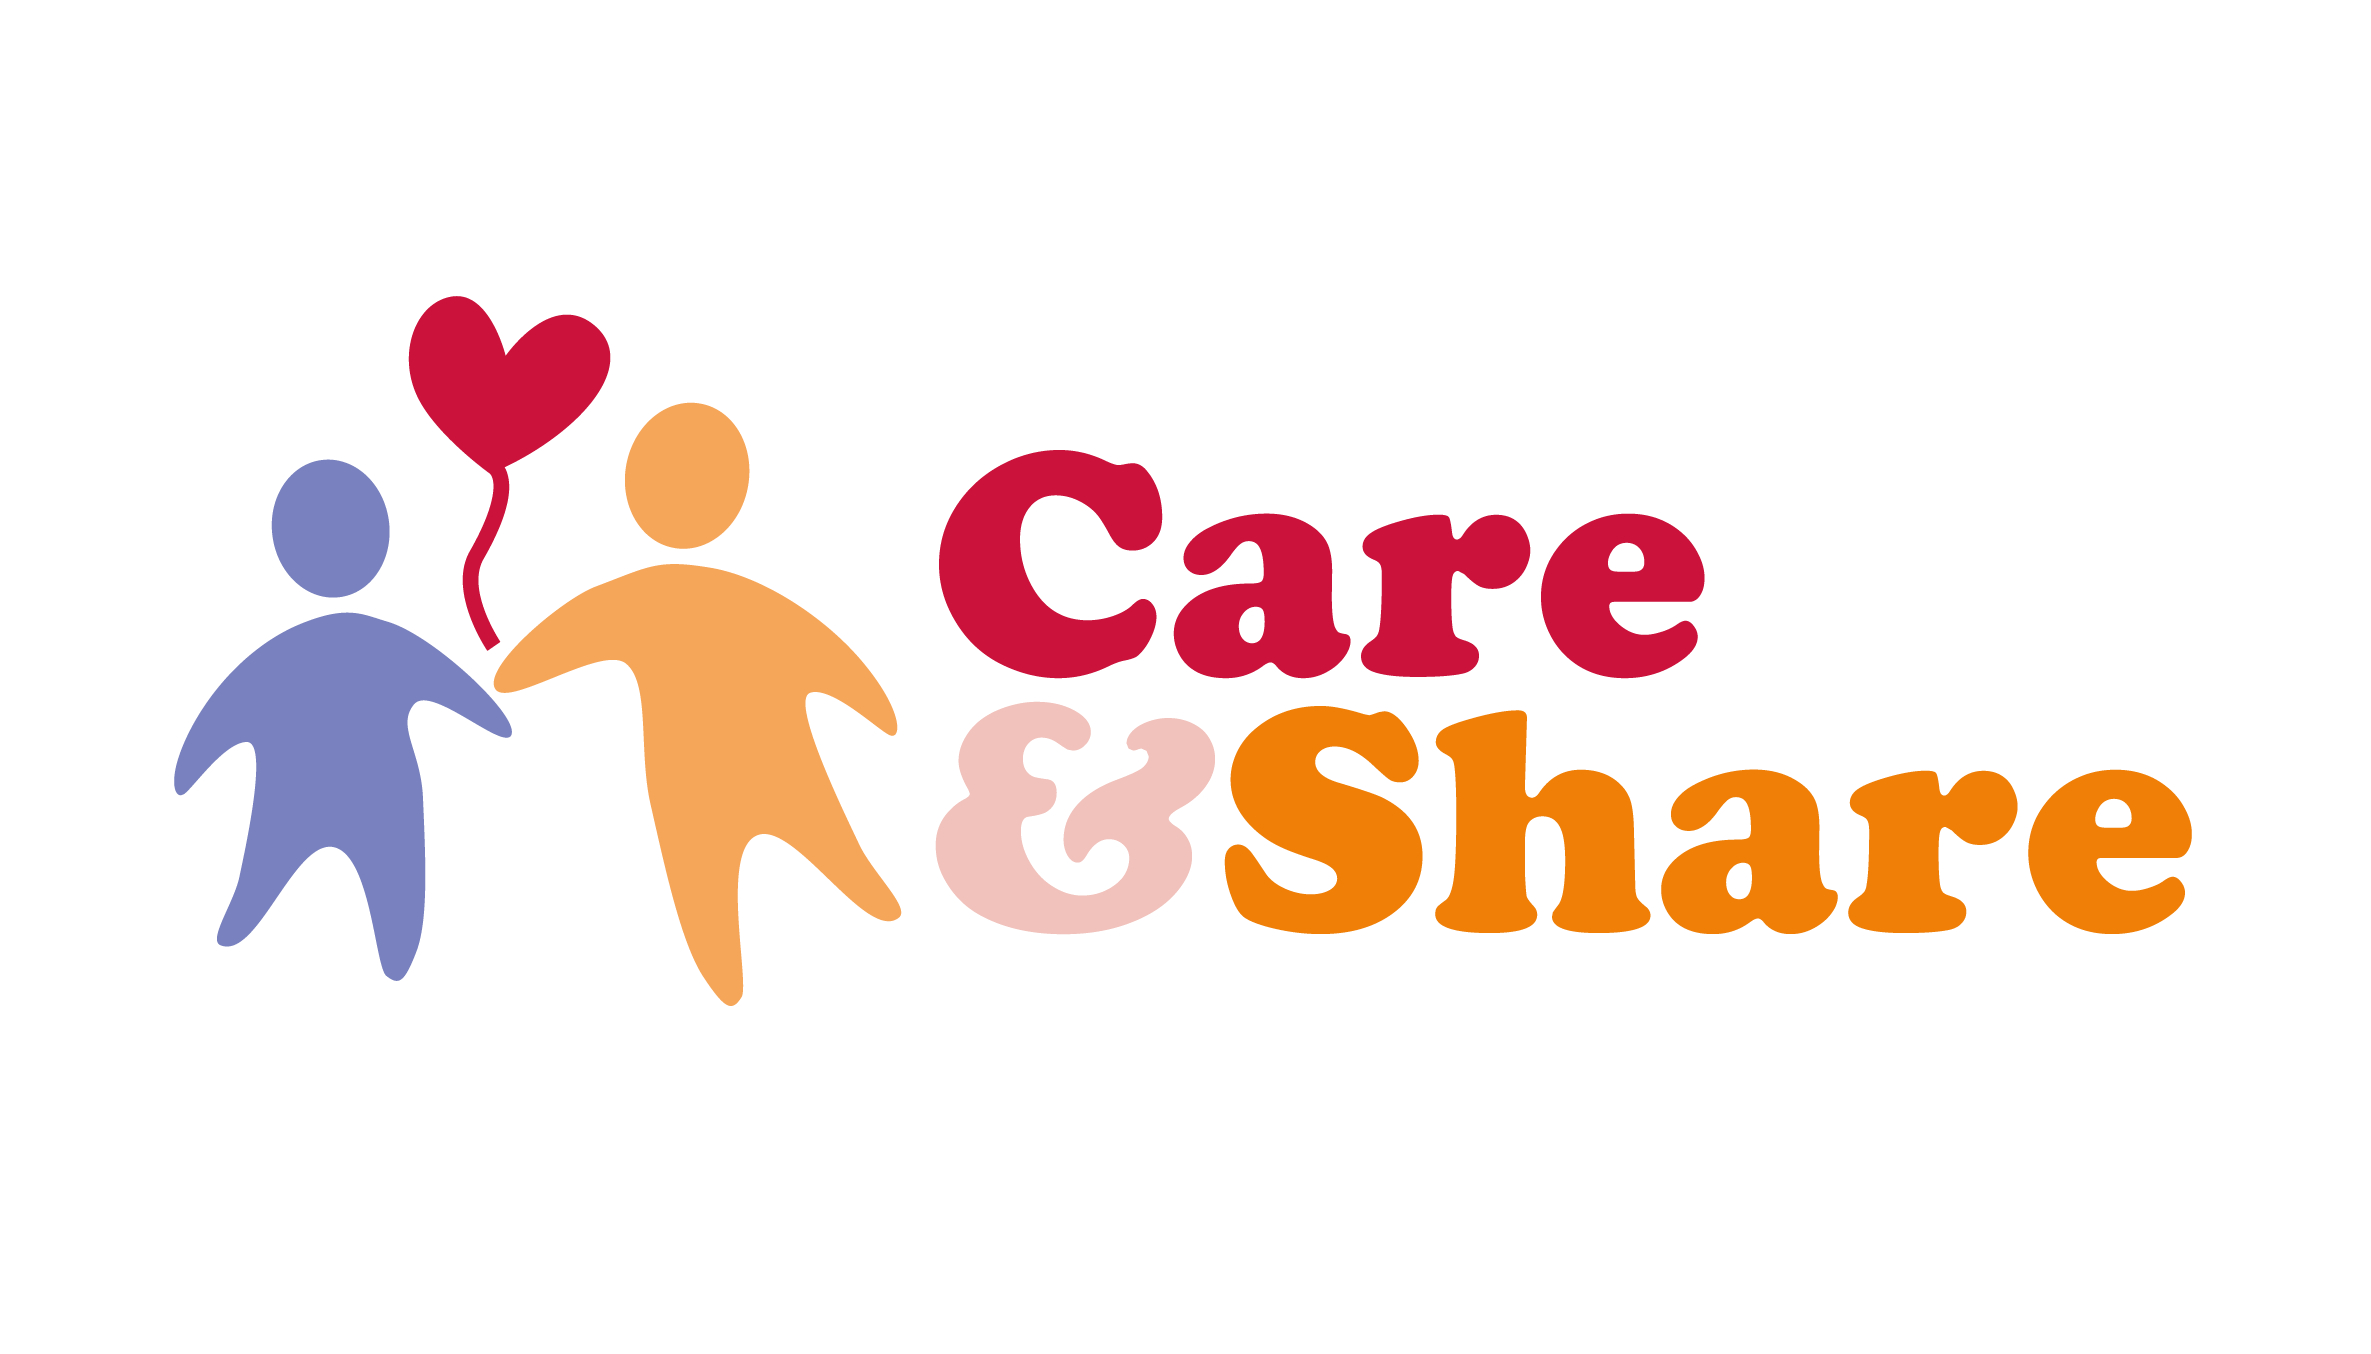 NCSS's Care & Share logo